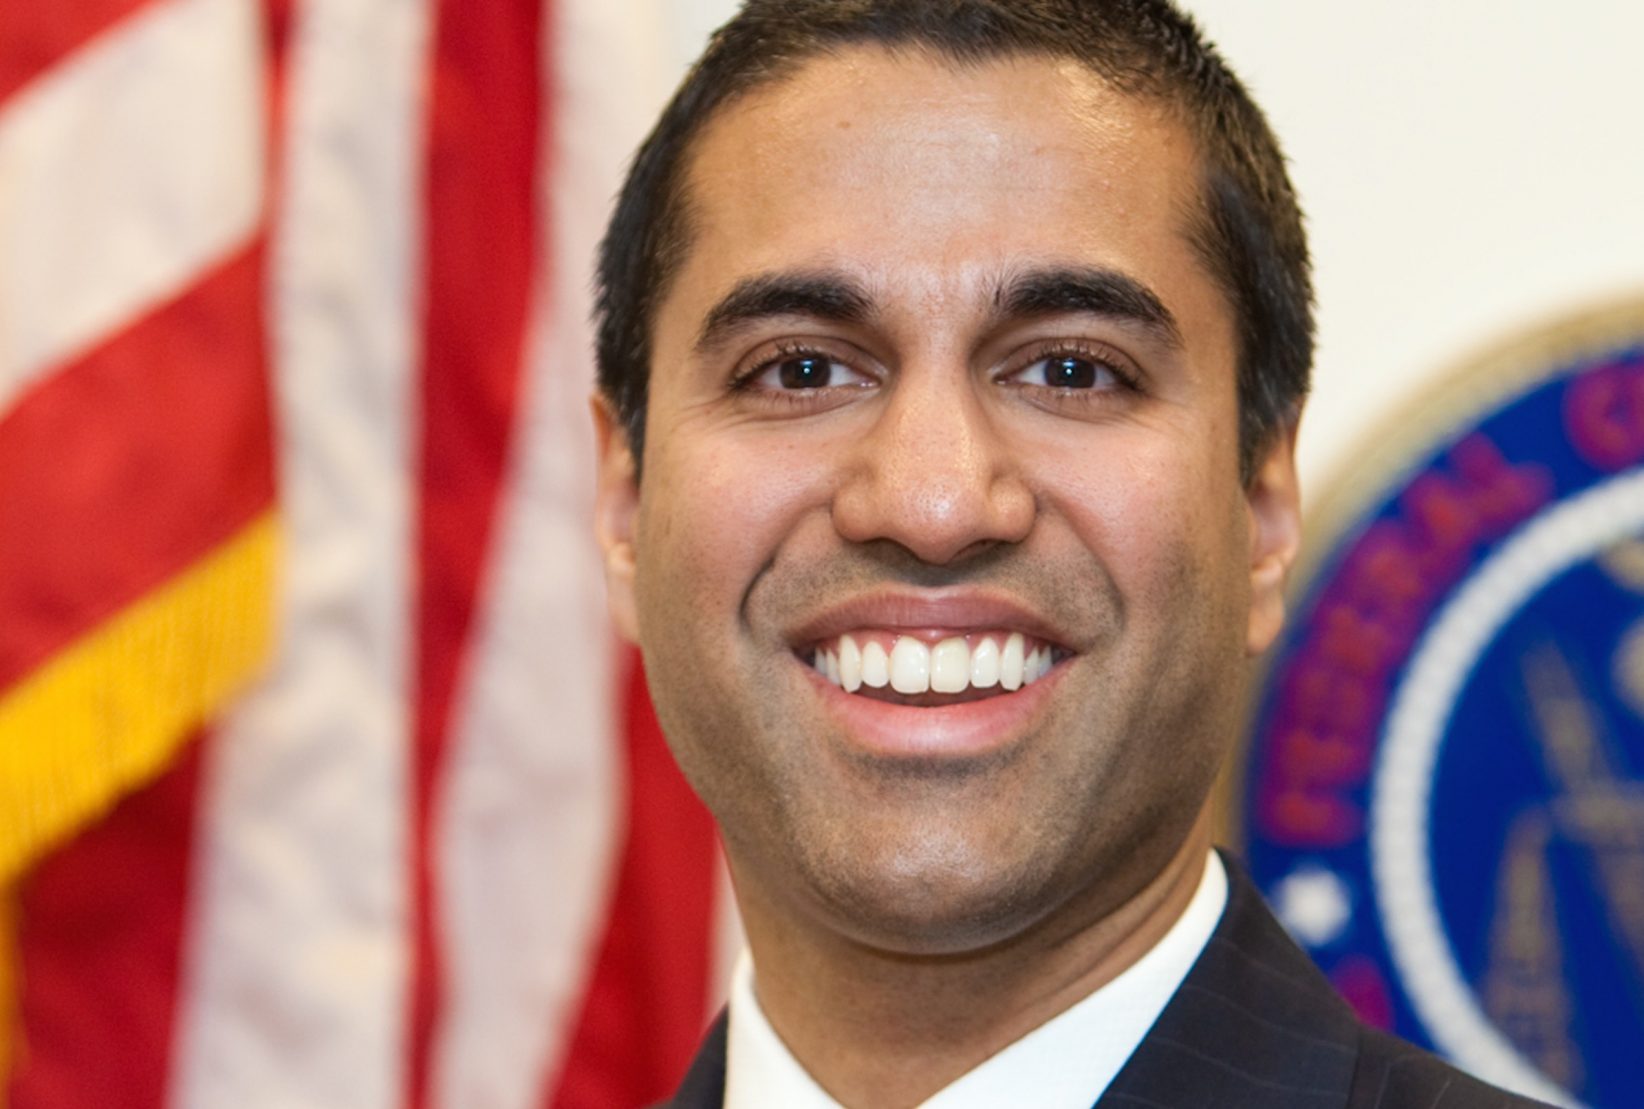 FCC head: Repealing net neutrality will boost innovation, investment; startups disagree